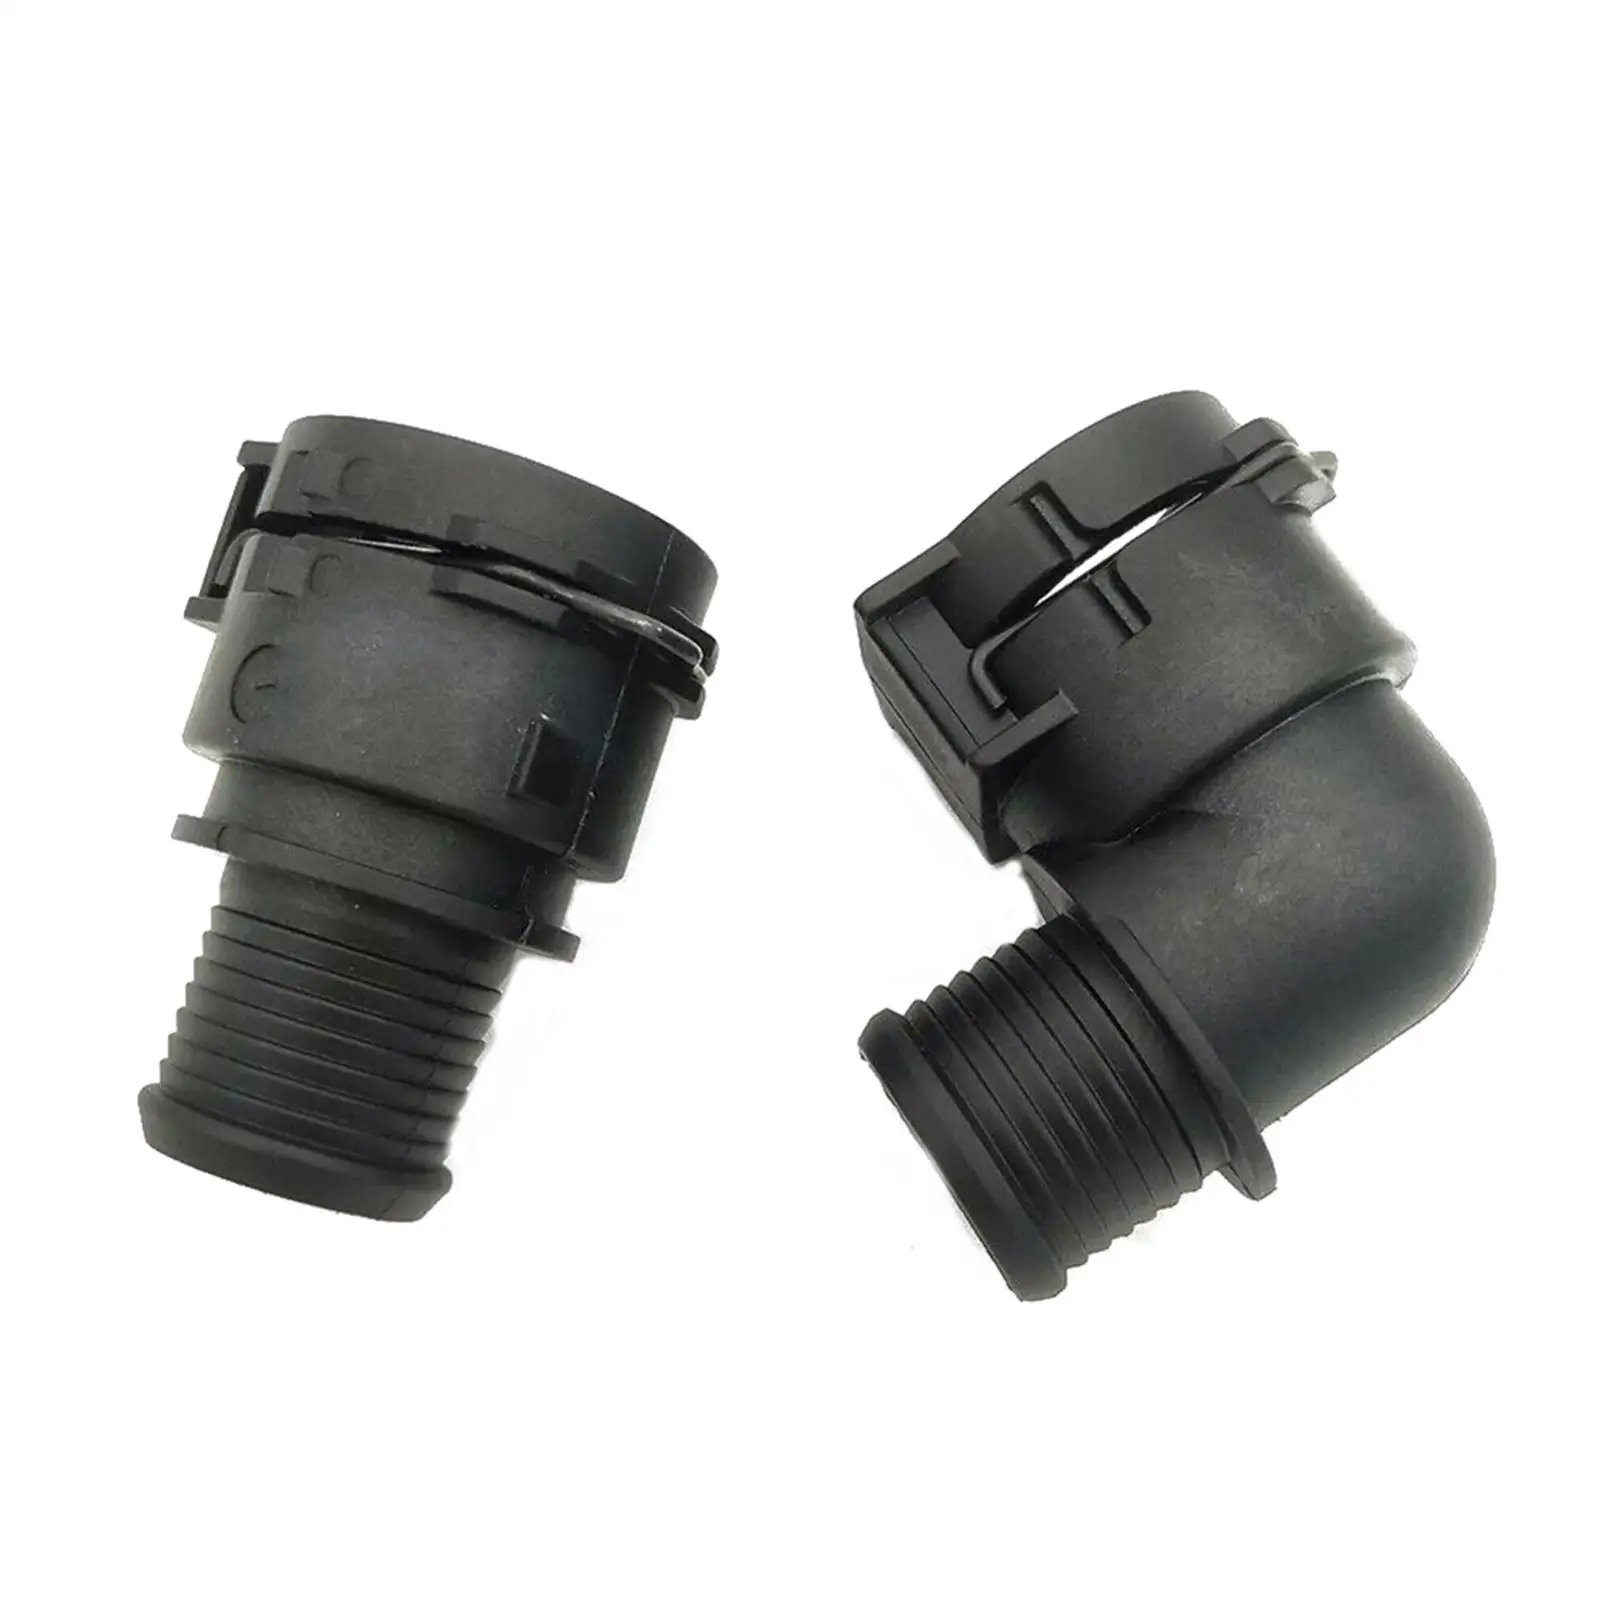 Replacement Heater Inlet Hose Connector Replace Parts 95089363 95089364 Convenient Installation Black